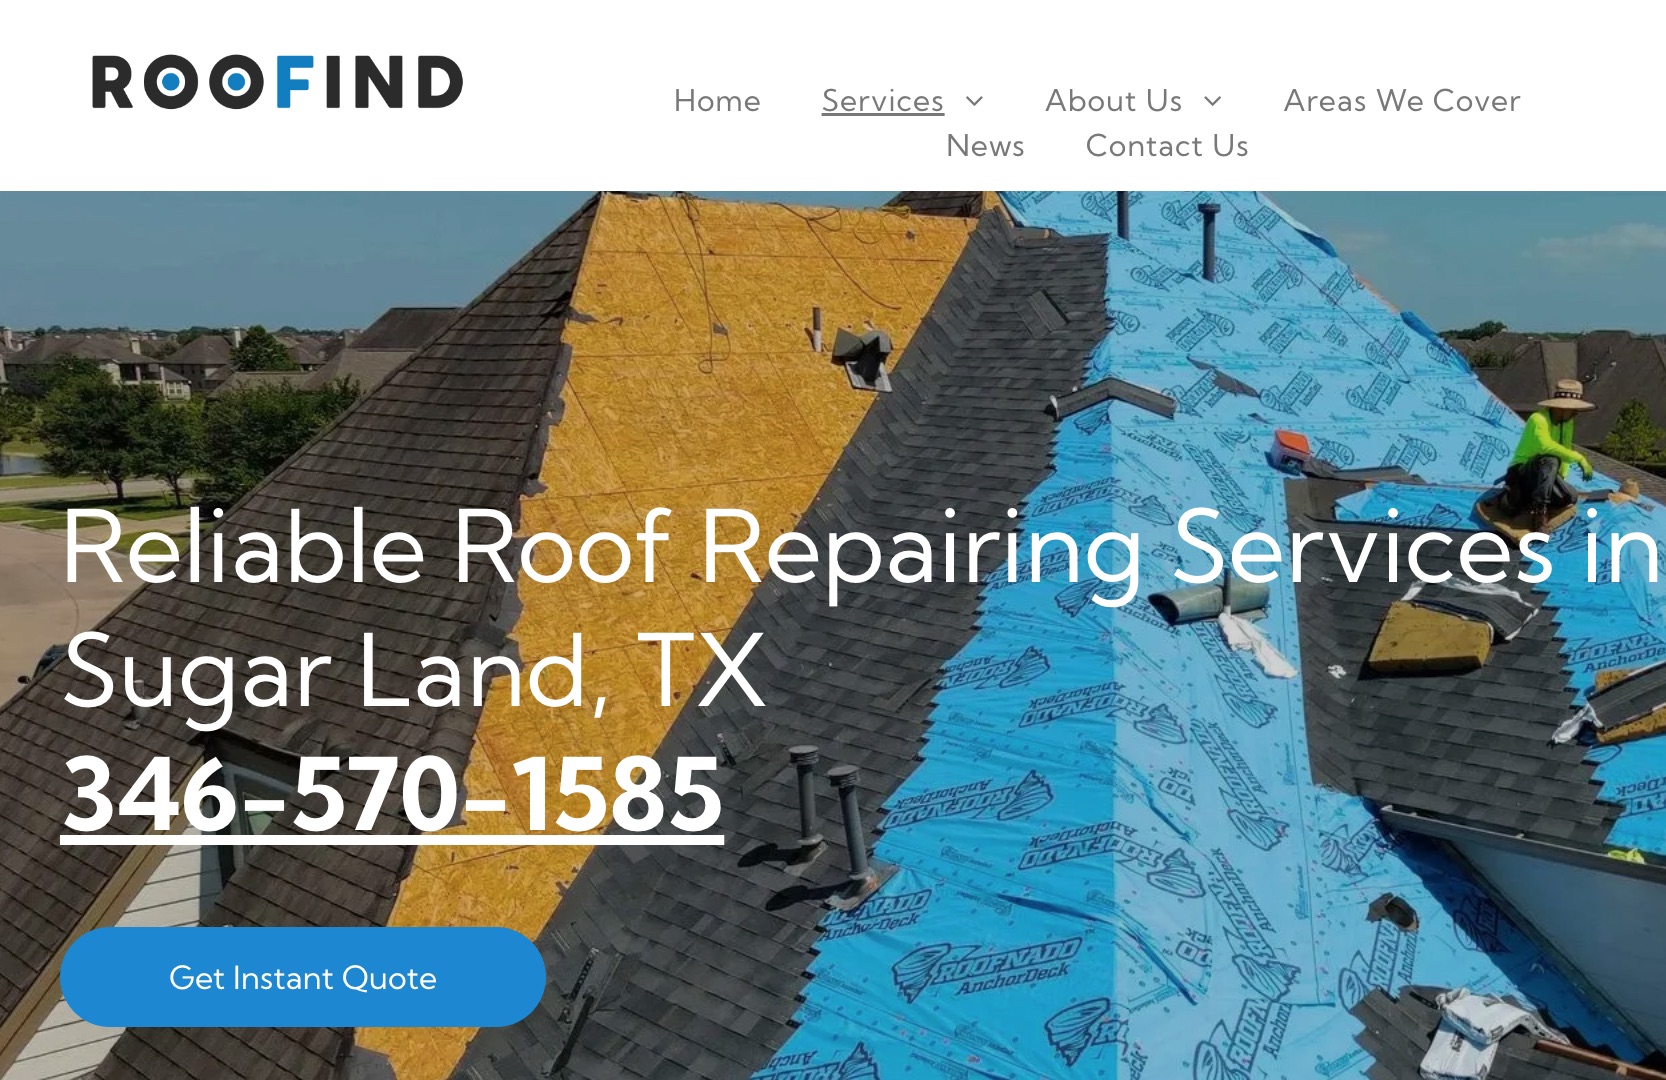 Siding and Roofing Brilliance: Roofind’s Impact on Houston Homes